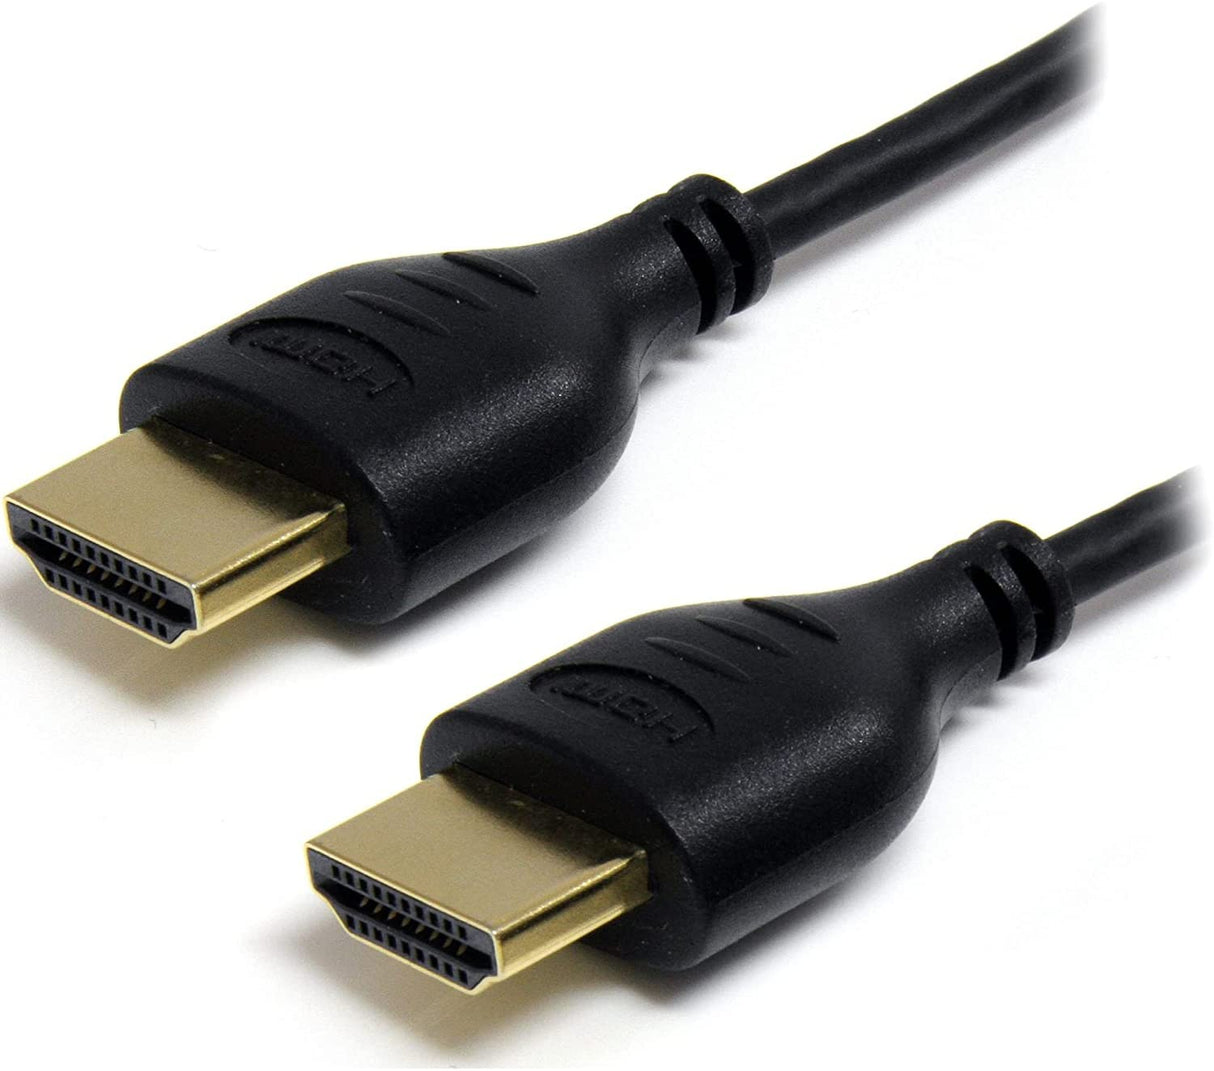 StarTech.com 3 ft Slim High Speed HDMI Cable with Ethernet - Ultra HD 4k x 2k HDMI Cable M/M - 3ft Slim HDMI Cable - 3ft HDMI Cable (HDMIMM3HSS),Black 3 ft / 1m Slim